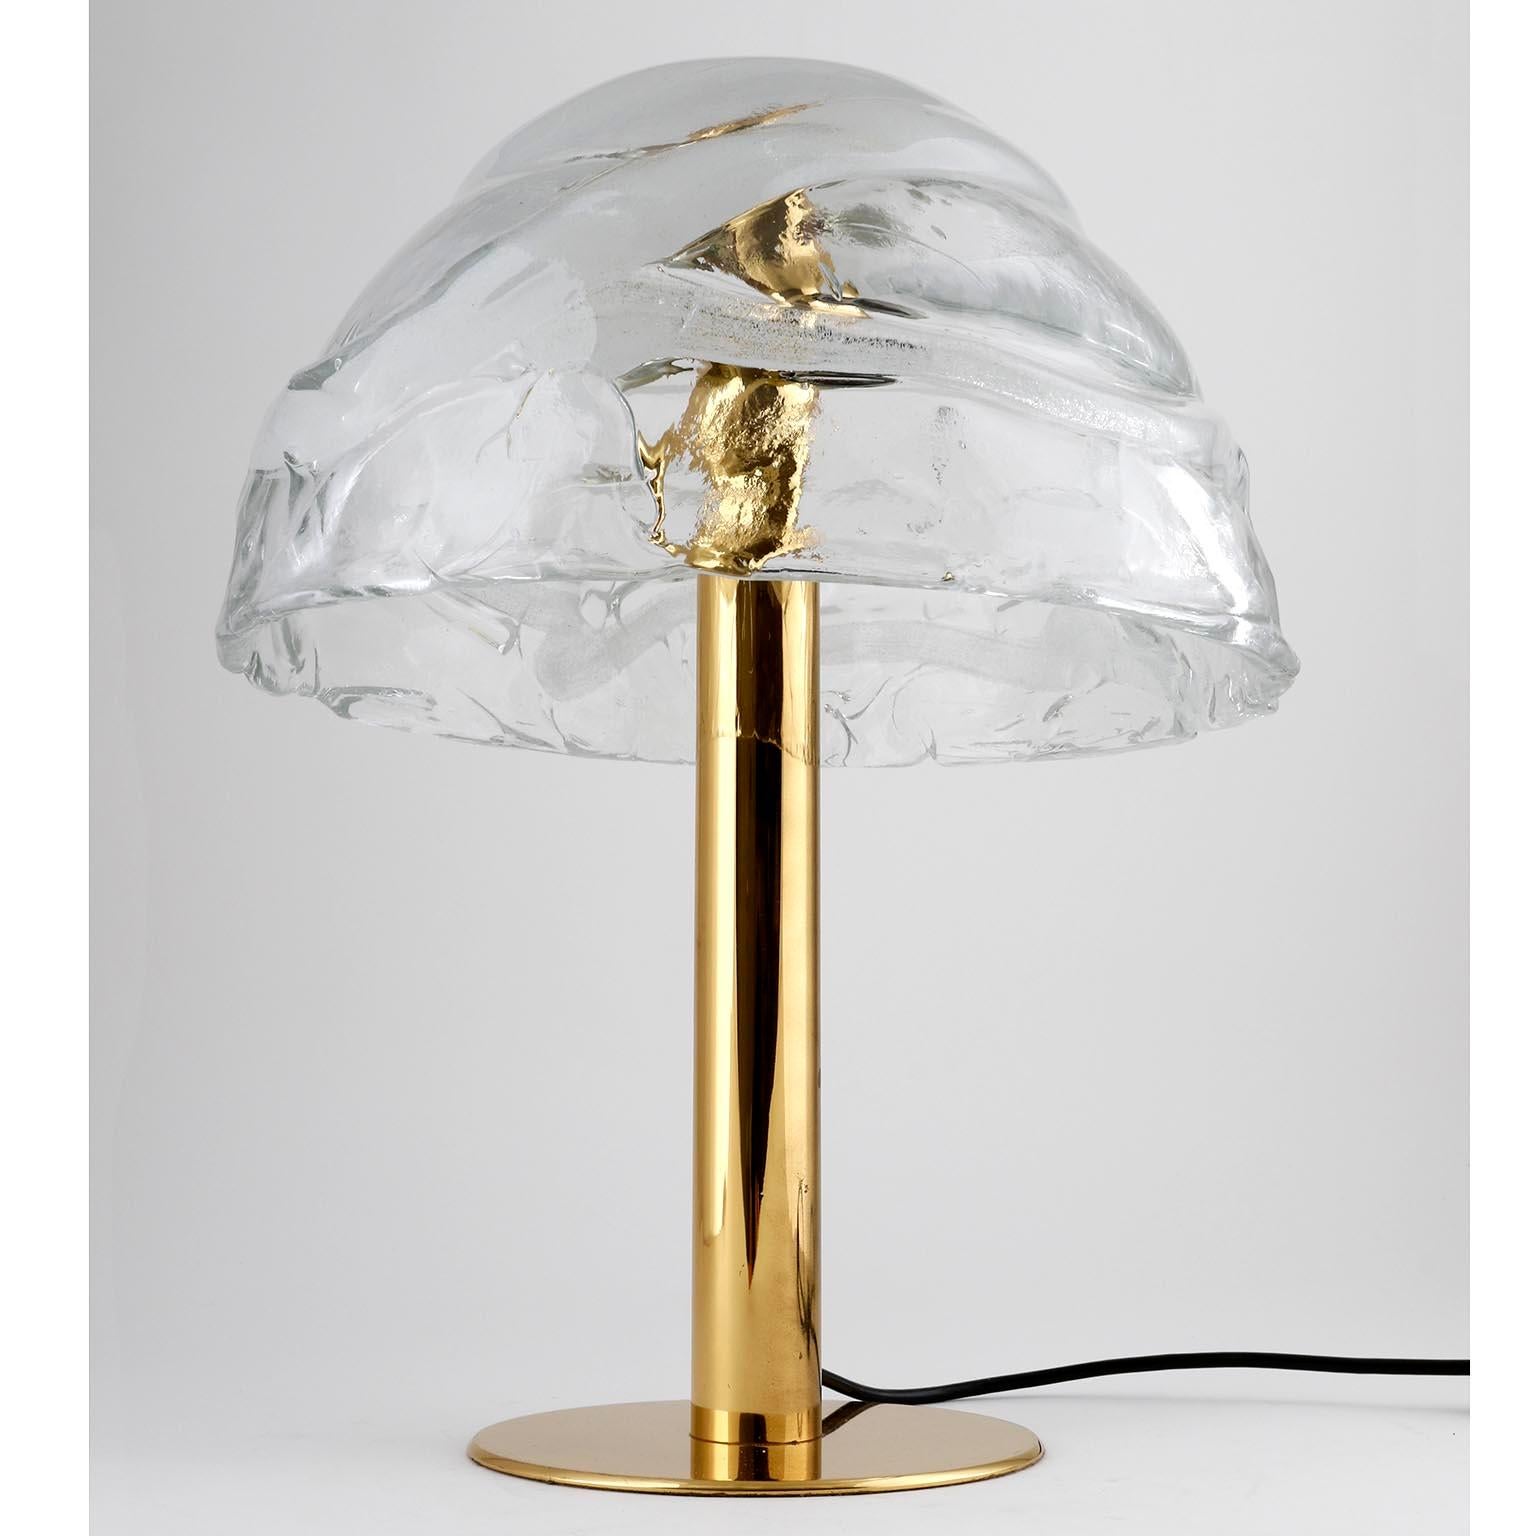 A brass and Murano glass table light model 'Dom' by J.T. Kalmar, Austria, manufactured in midcentury, circa 1970 (late 1960s or early 1970s).
A large hand blown lampshade made of textured clear crystal glass with a white bubble spiral is held by a